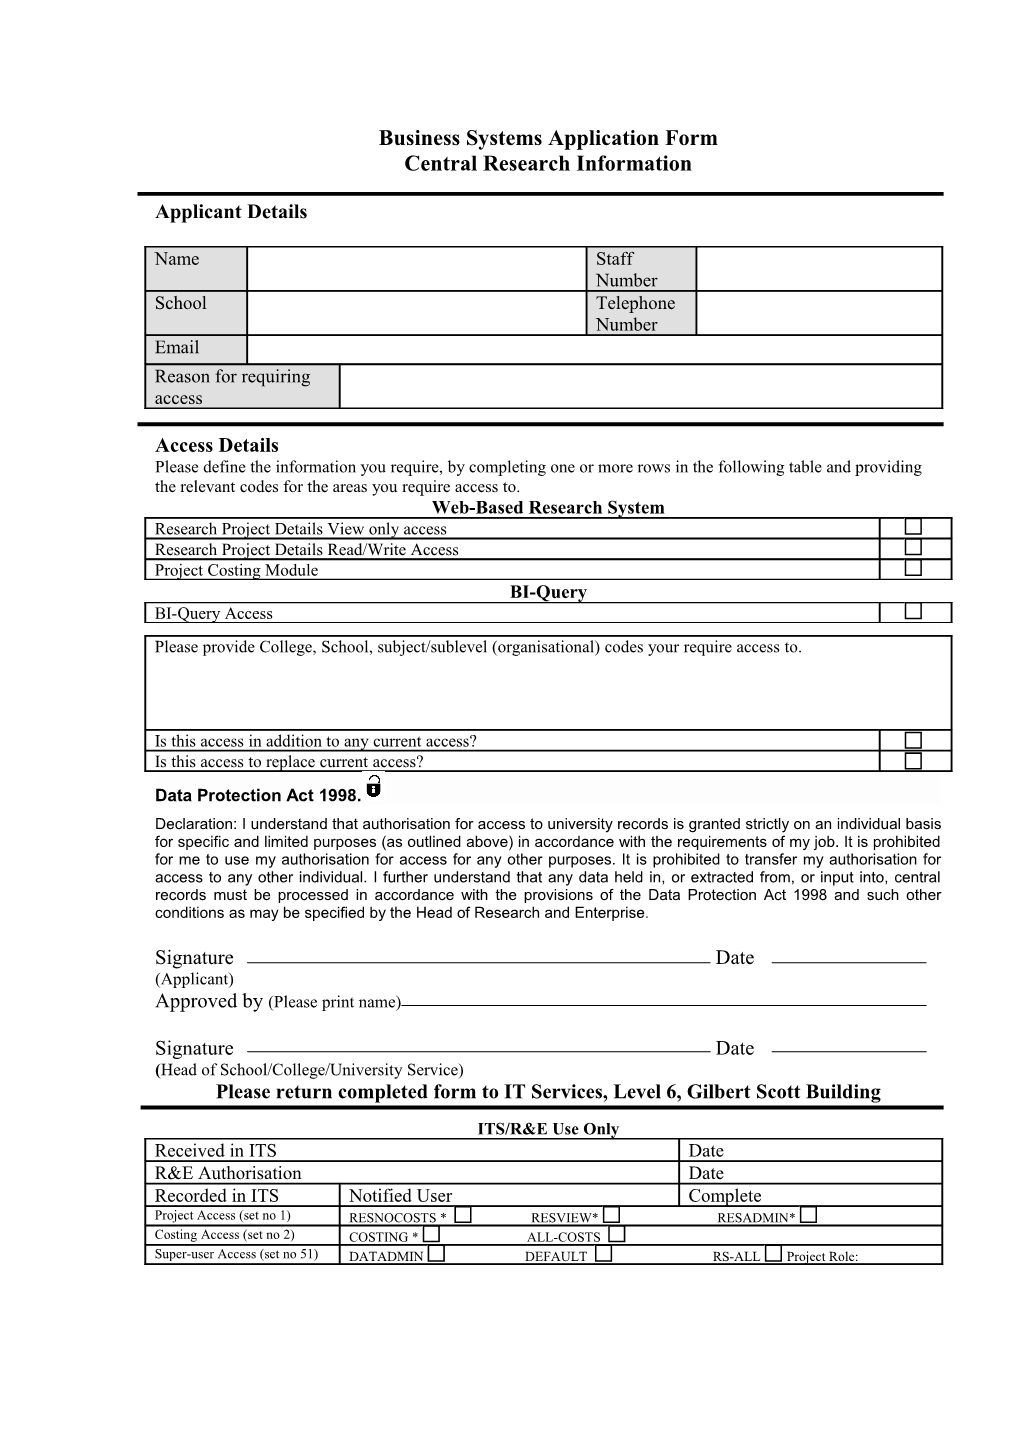 Business Systems Application Form for Access to Student Records